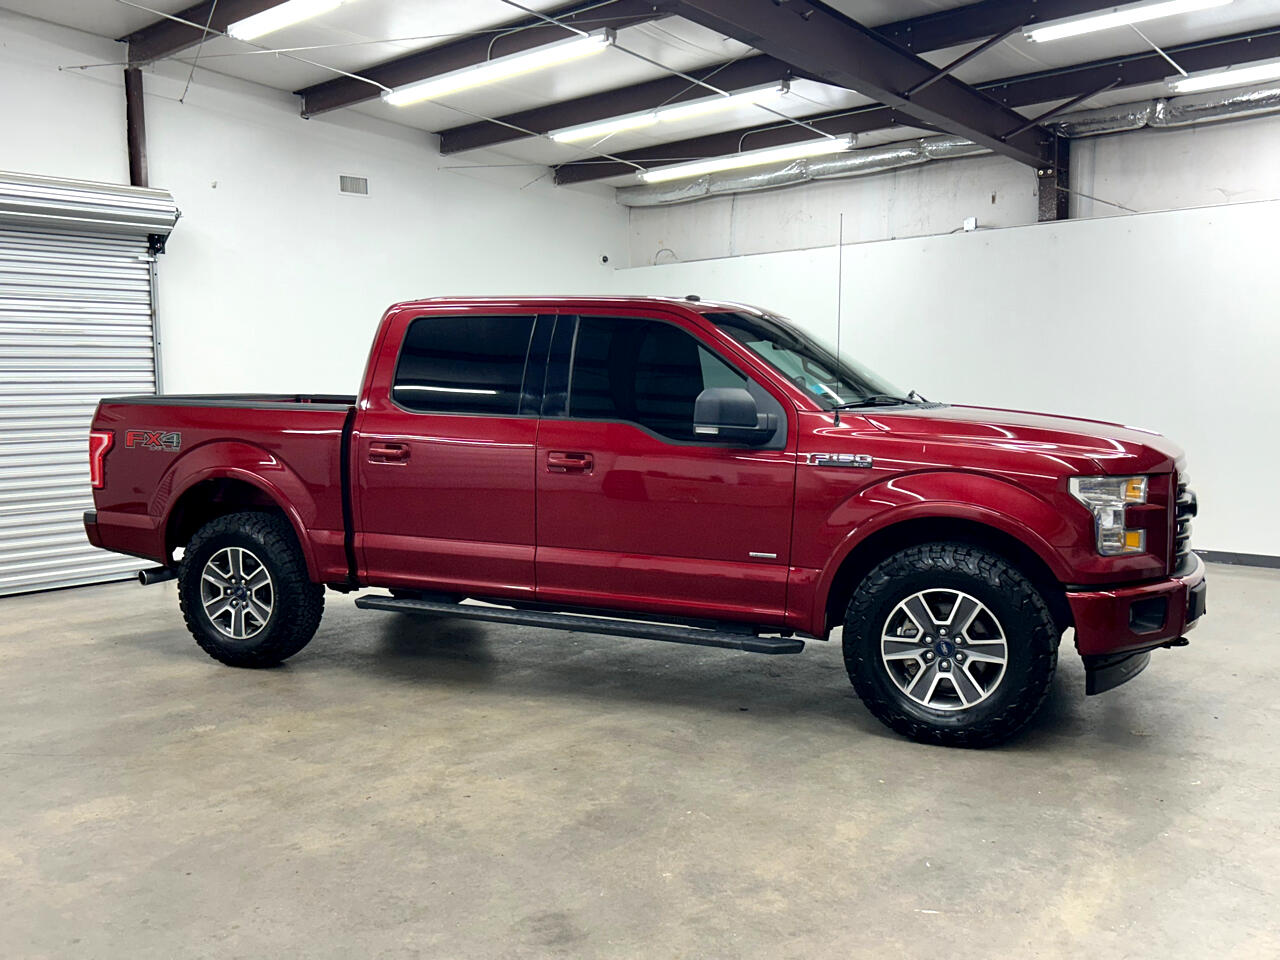 2017 Ford F-150 XLT SuperCrew 5.5-ft. Bed 4WD